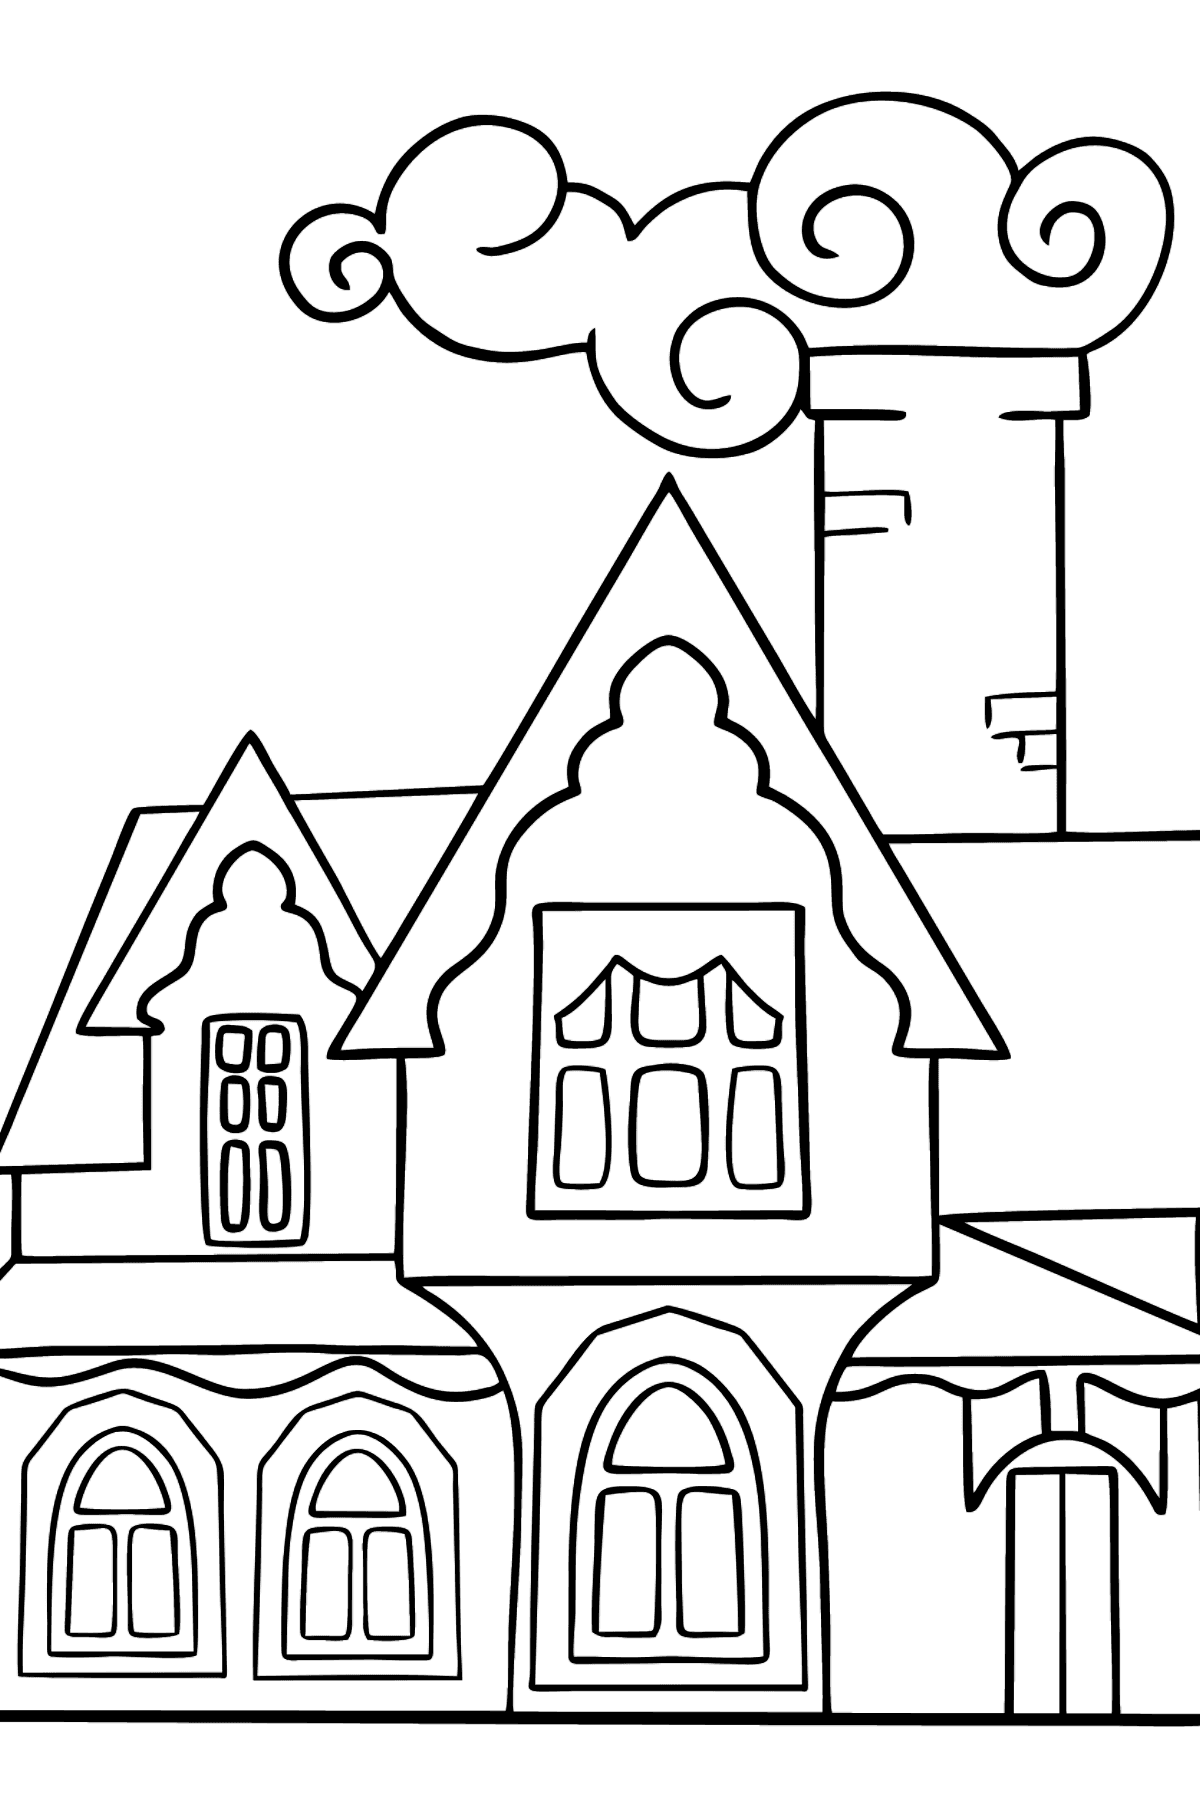 Miraculous House Coloring Page ♥ Online and Print for Free!